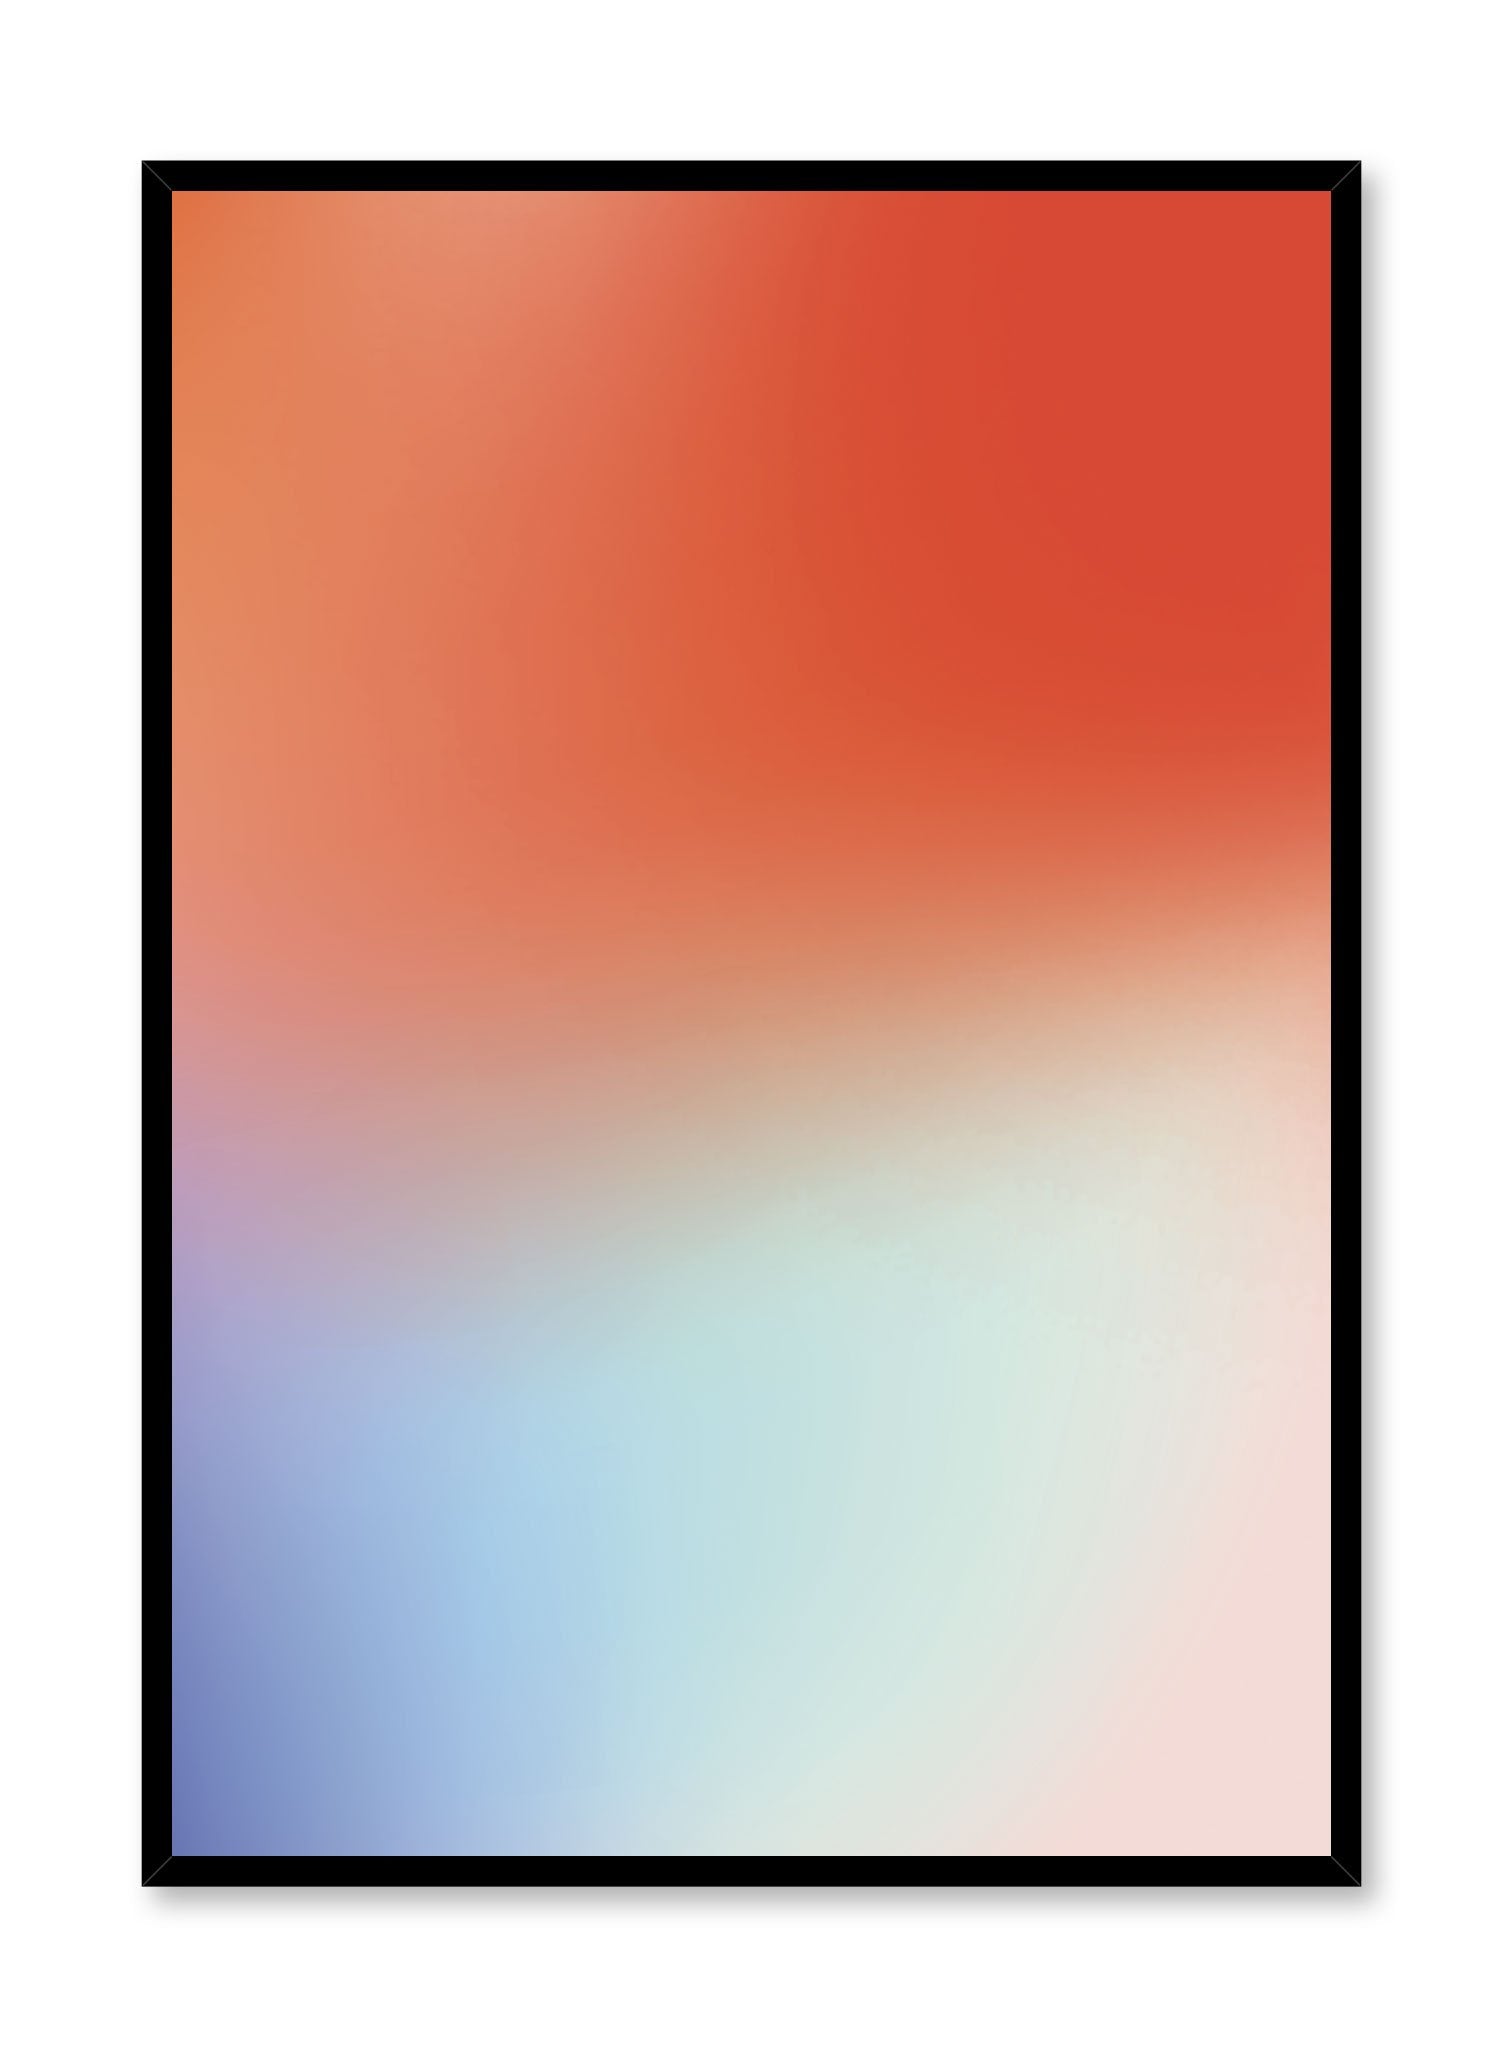 Minimalist design poster by Opposite Wall with Cayenne abstract graphic design of red and blue tie-dye background